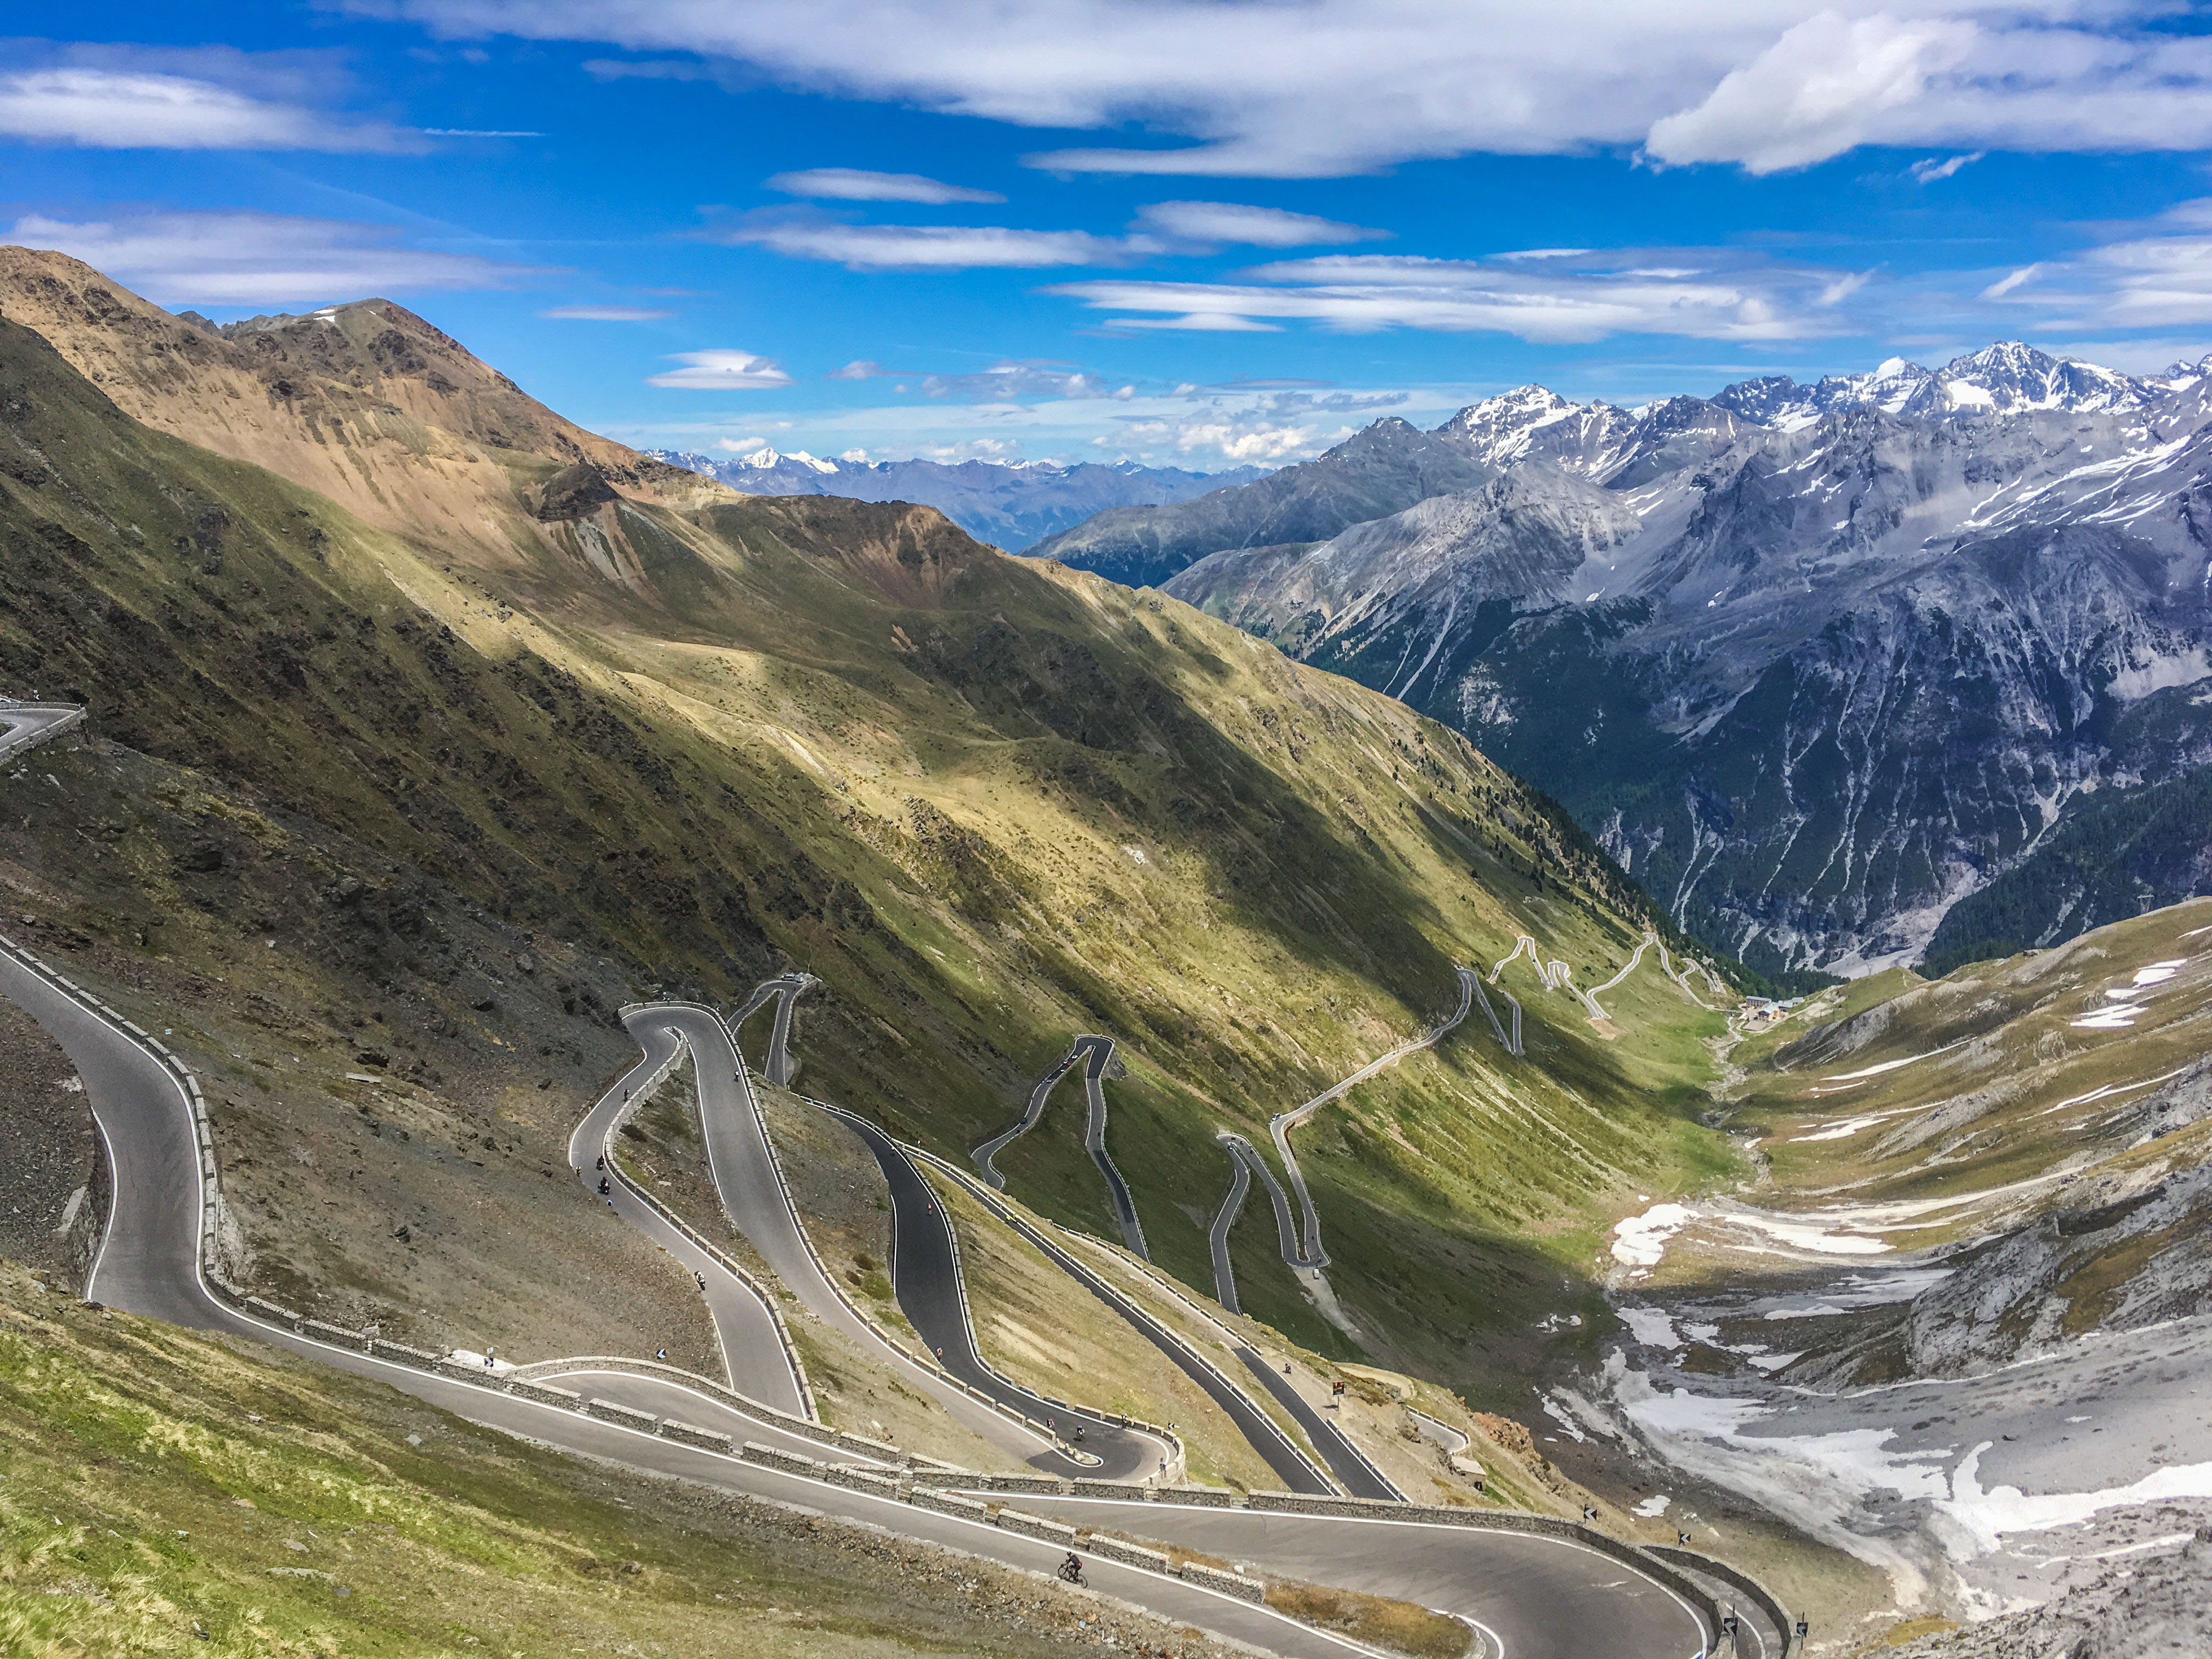 Stelvio Pass in Italy, Europe | Nature Reserves - Rated 4.2